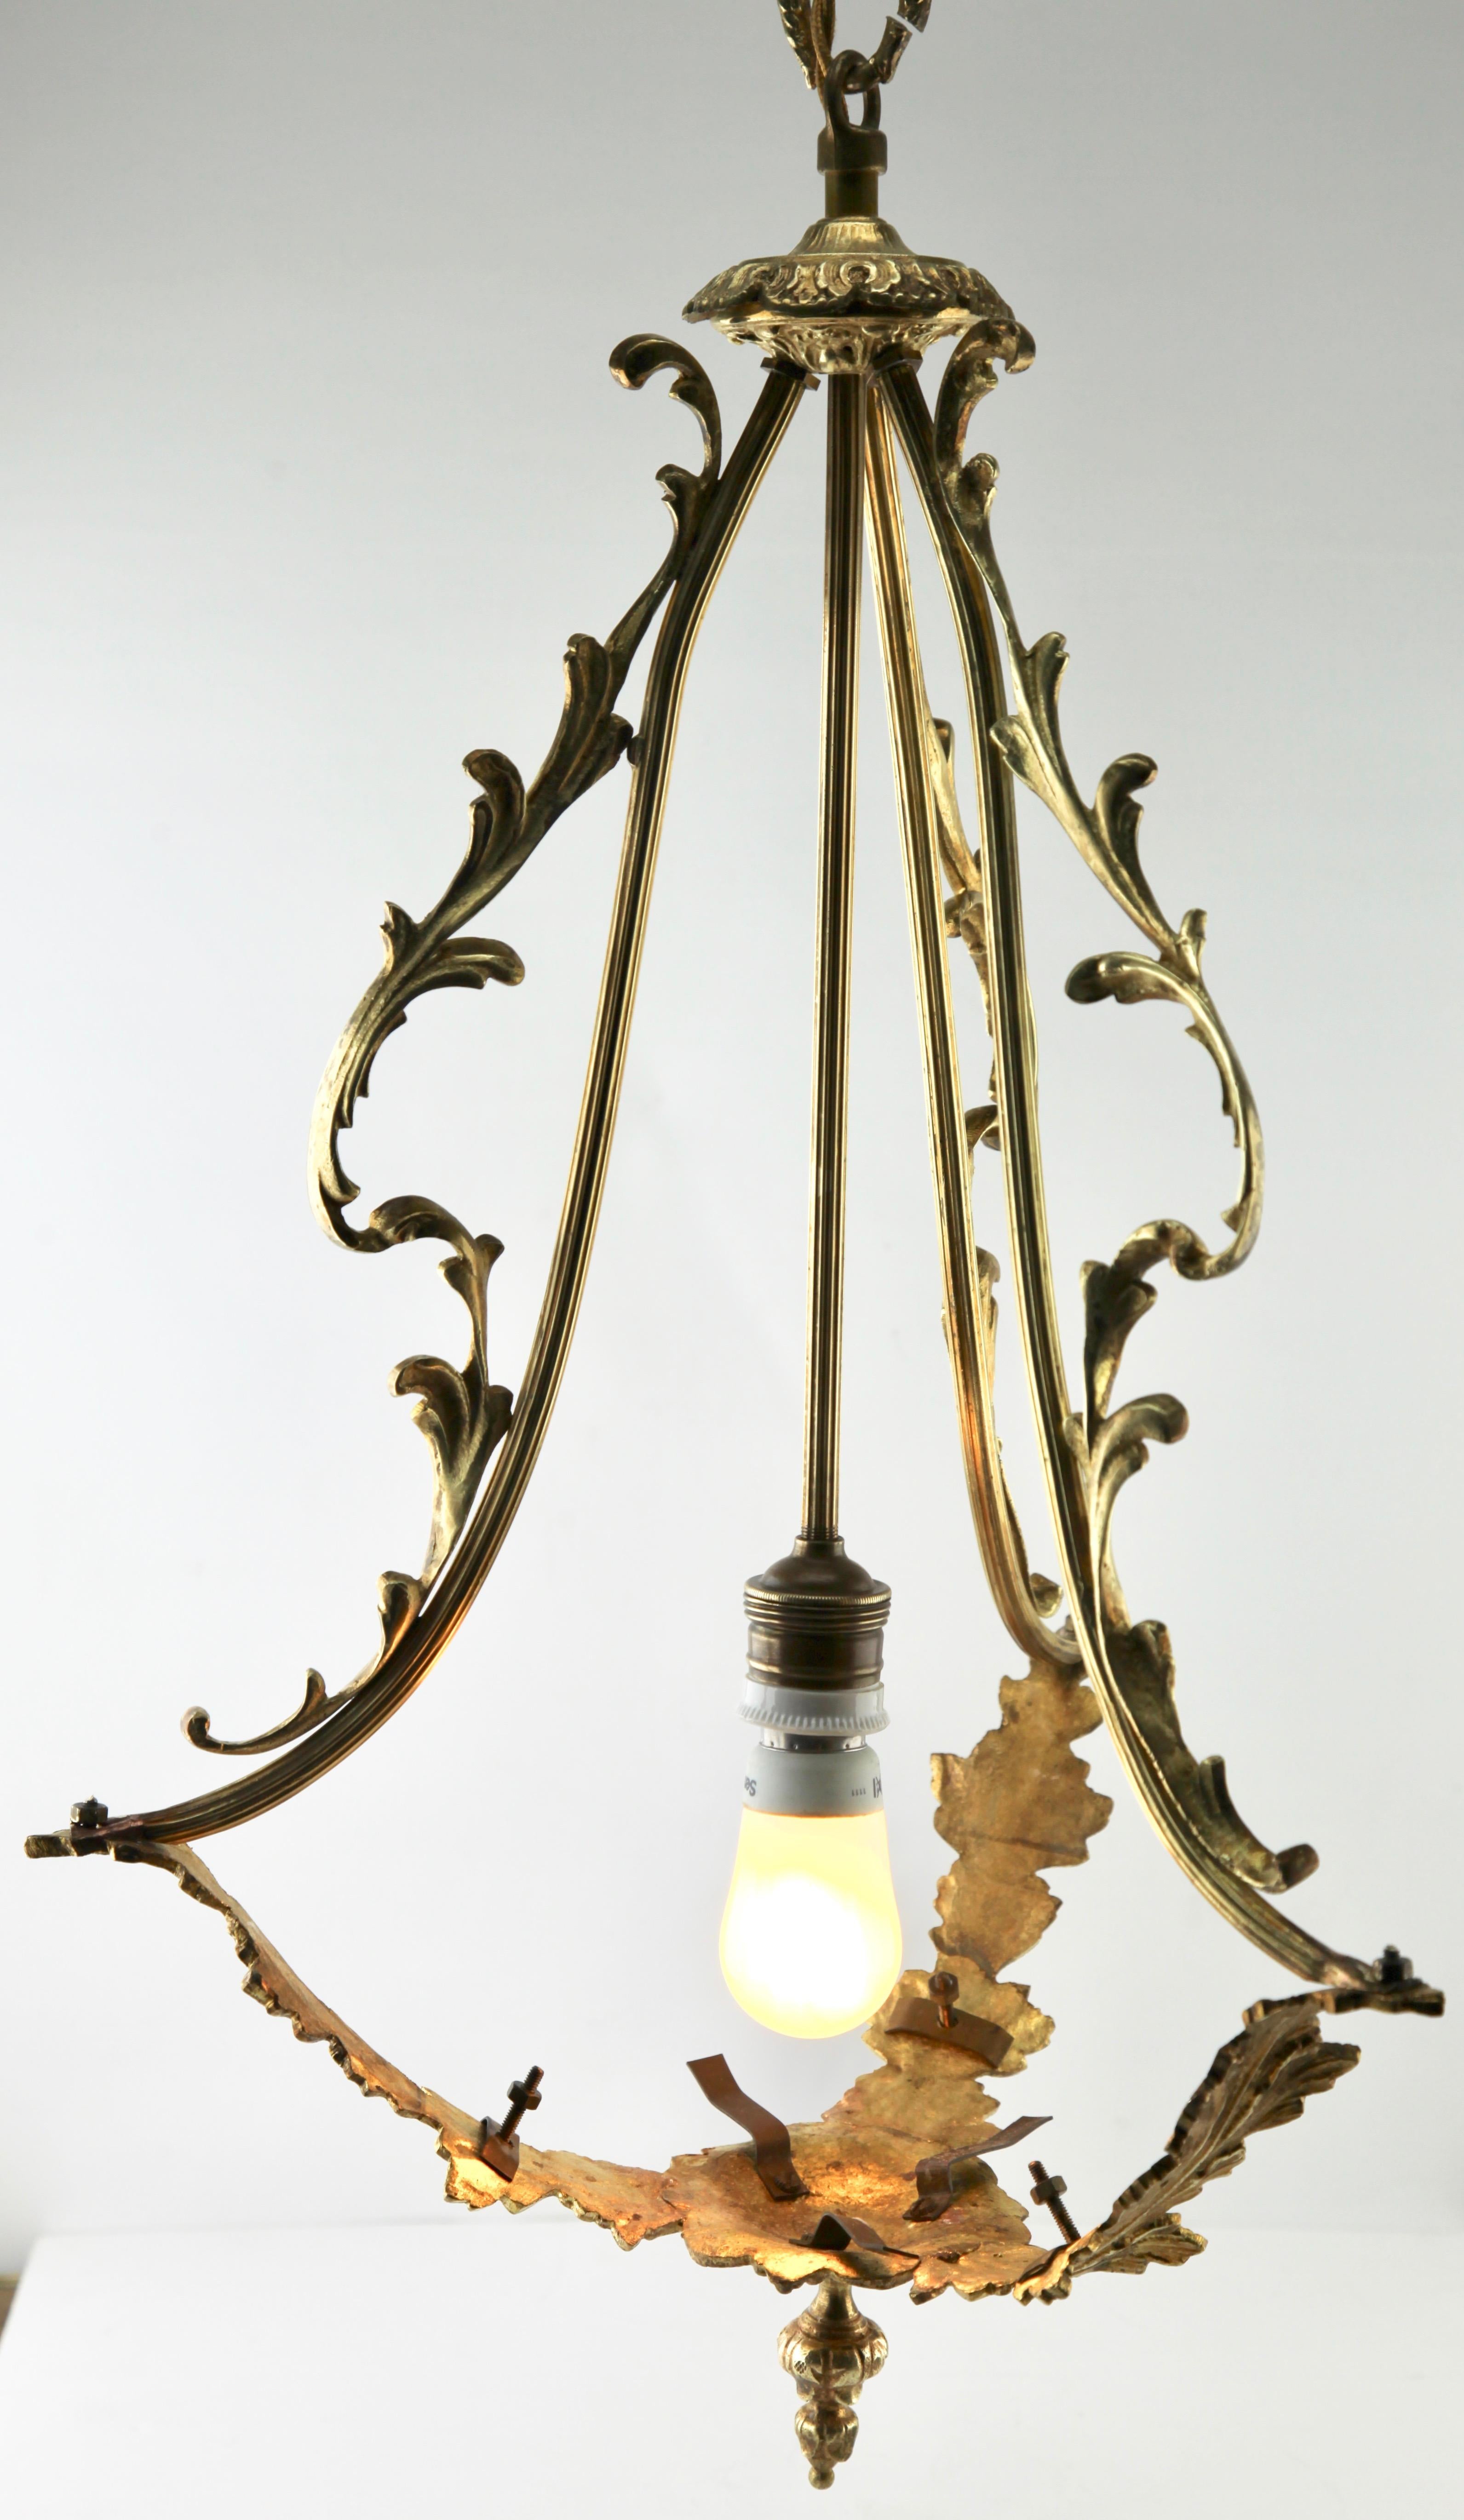 Art Nouveau Central Pendant Lamp Whit Three Clam Shells and Framework of Brass 6